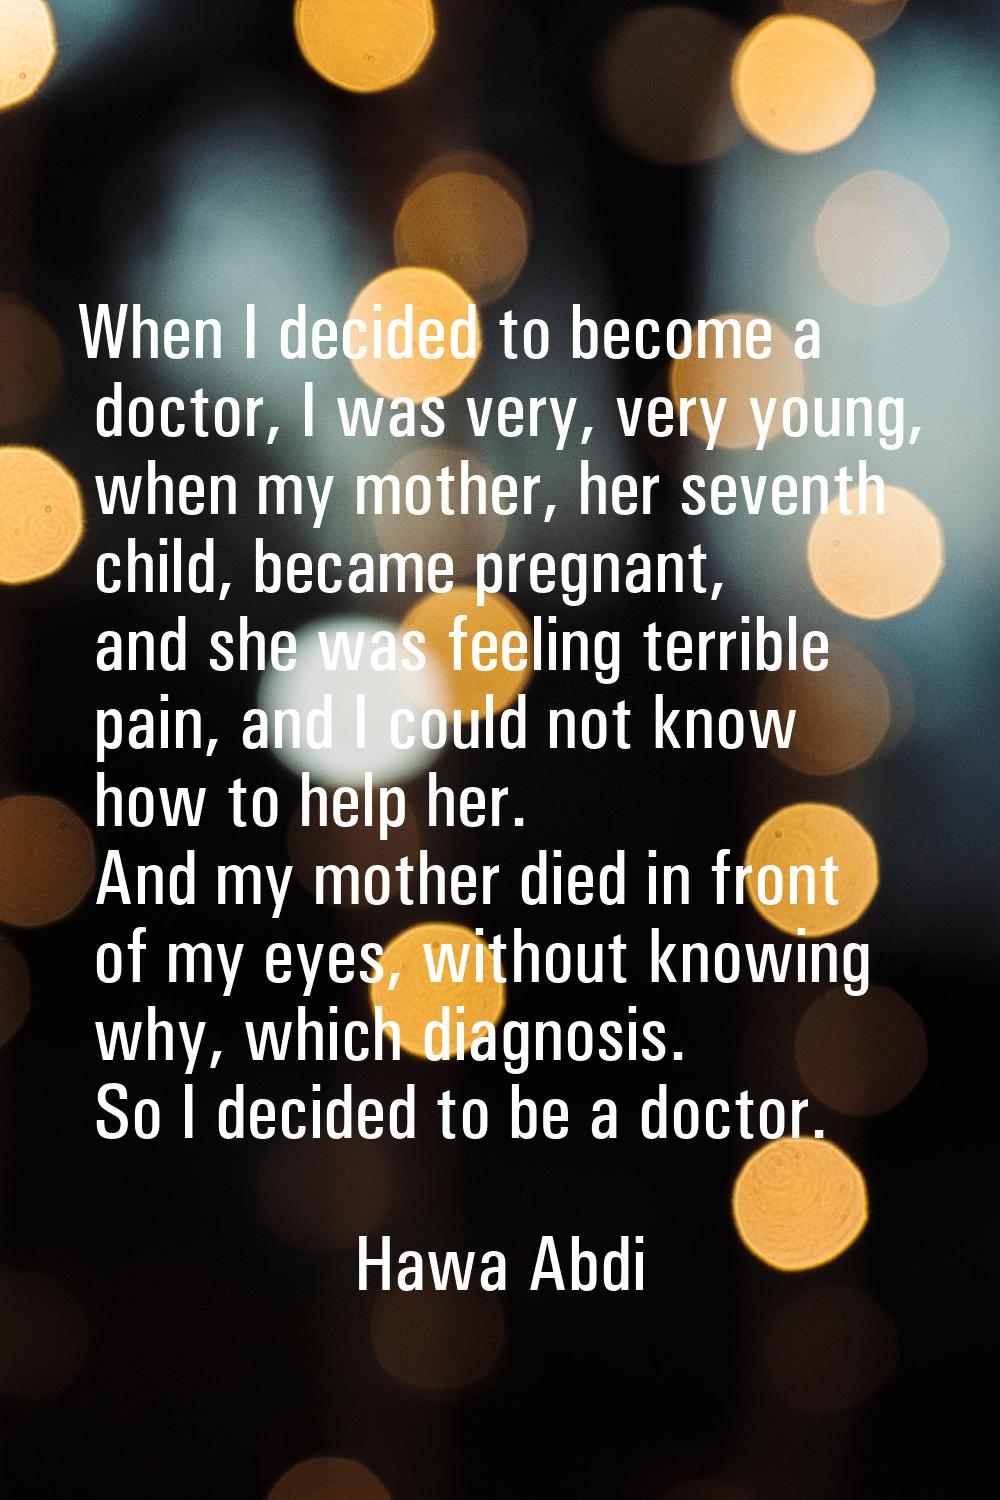 When I decided to become a doctor, I was very, very young, when my mother, her seventh child, becam